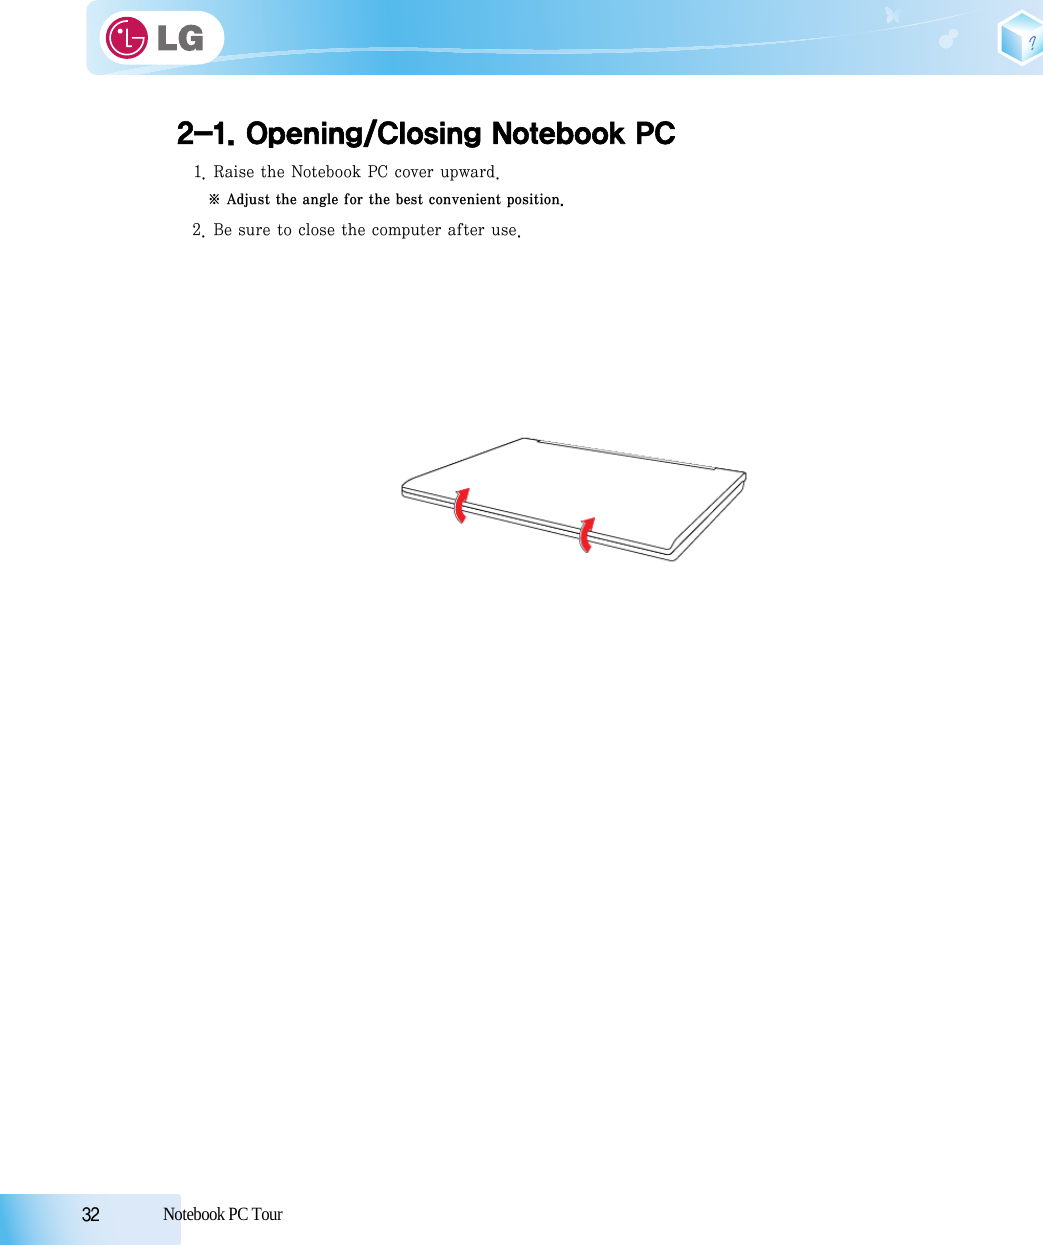 32            Notebook PC Tour2-1. Opening/Closing Notebook PC1. Raise the Notebook PC cover upward.※ Adjust the angle for the best convenient position.2. Be sure to close the computer after use.